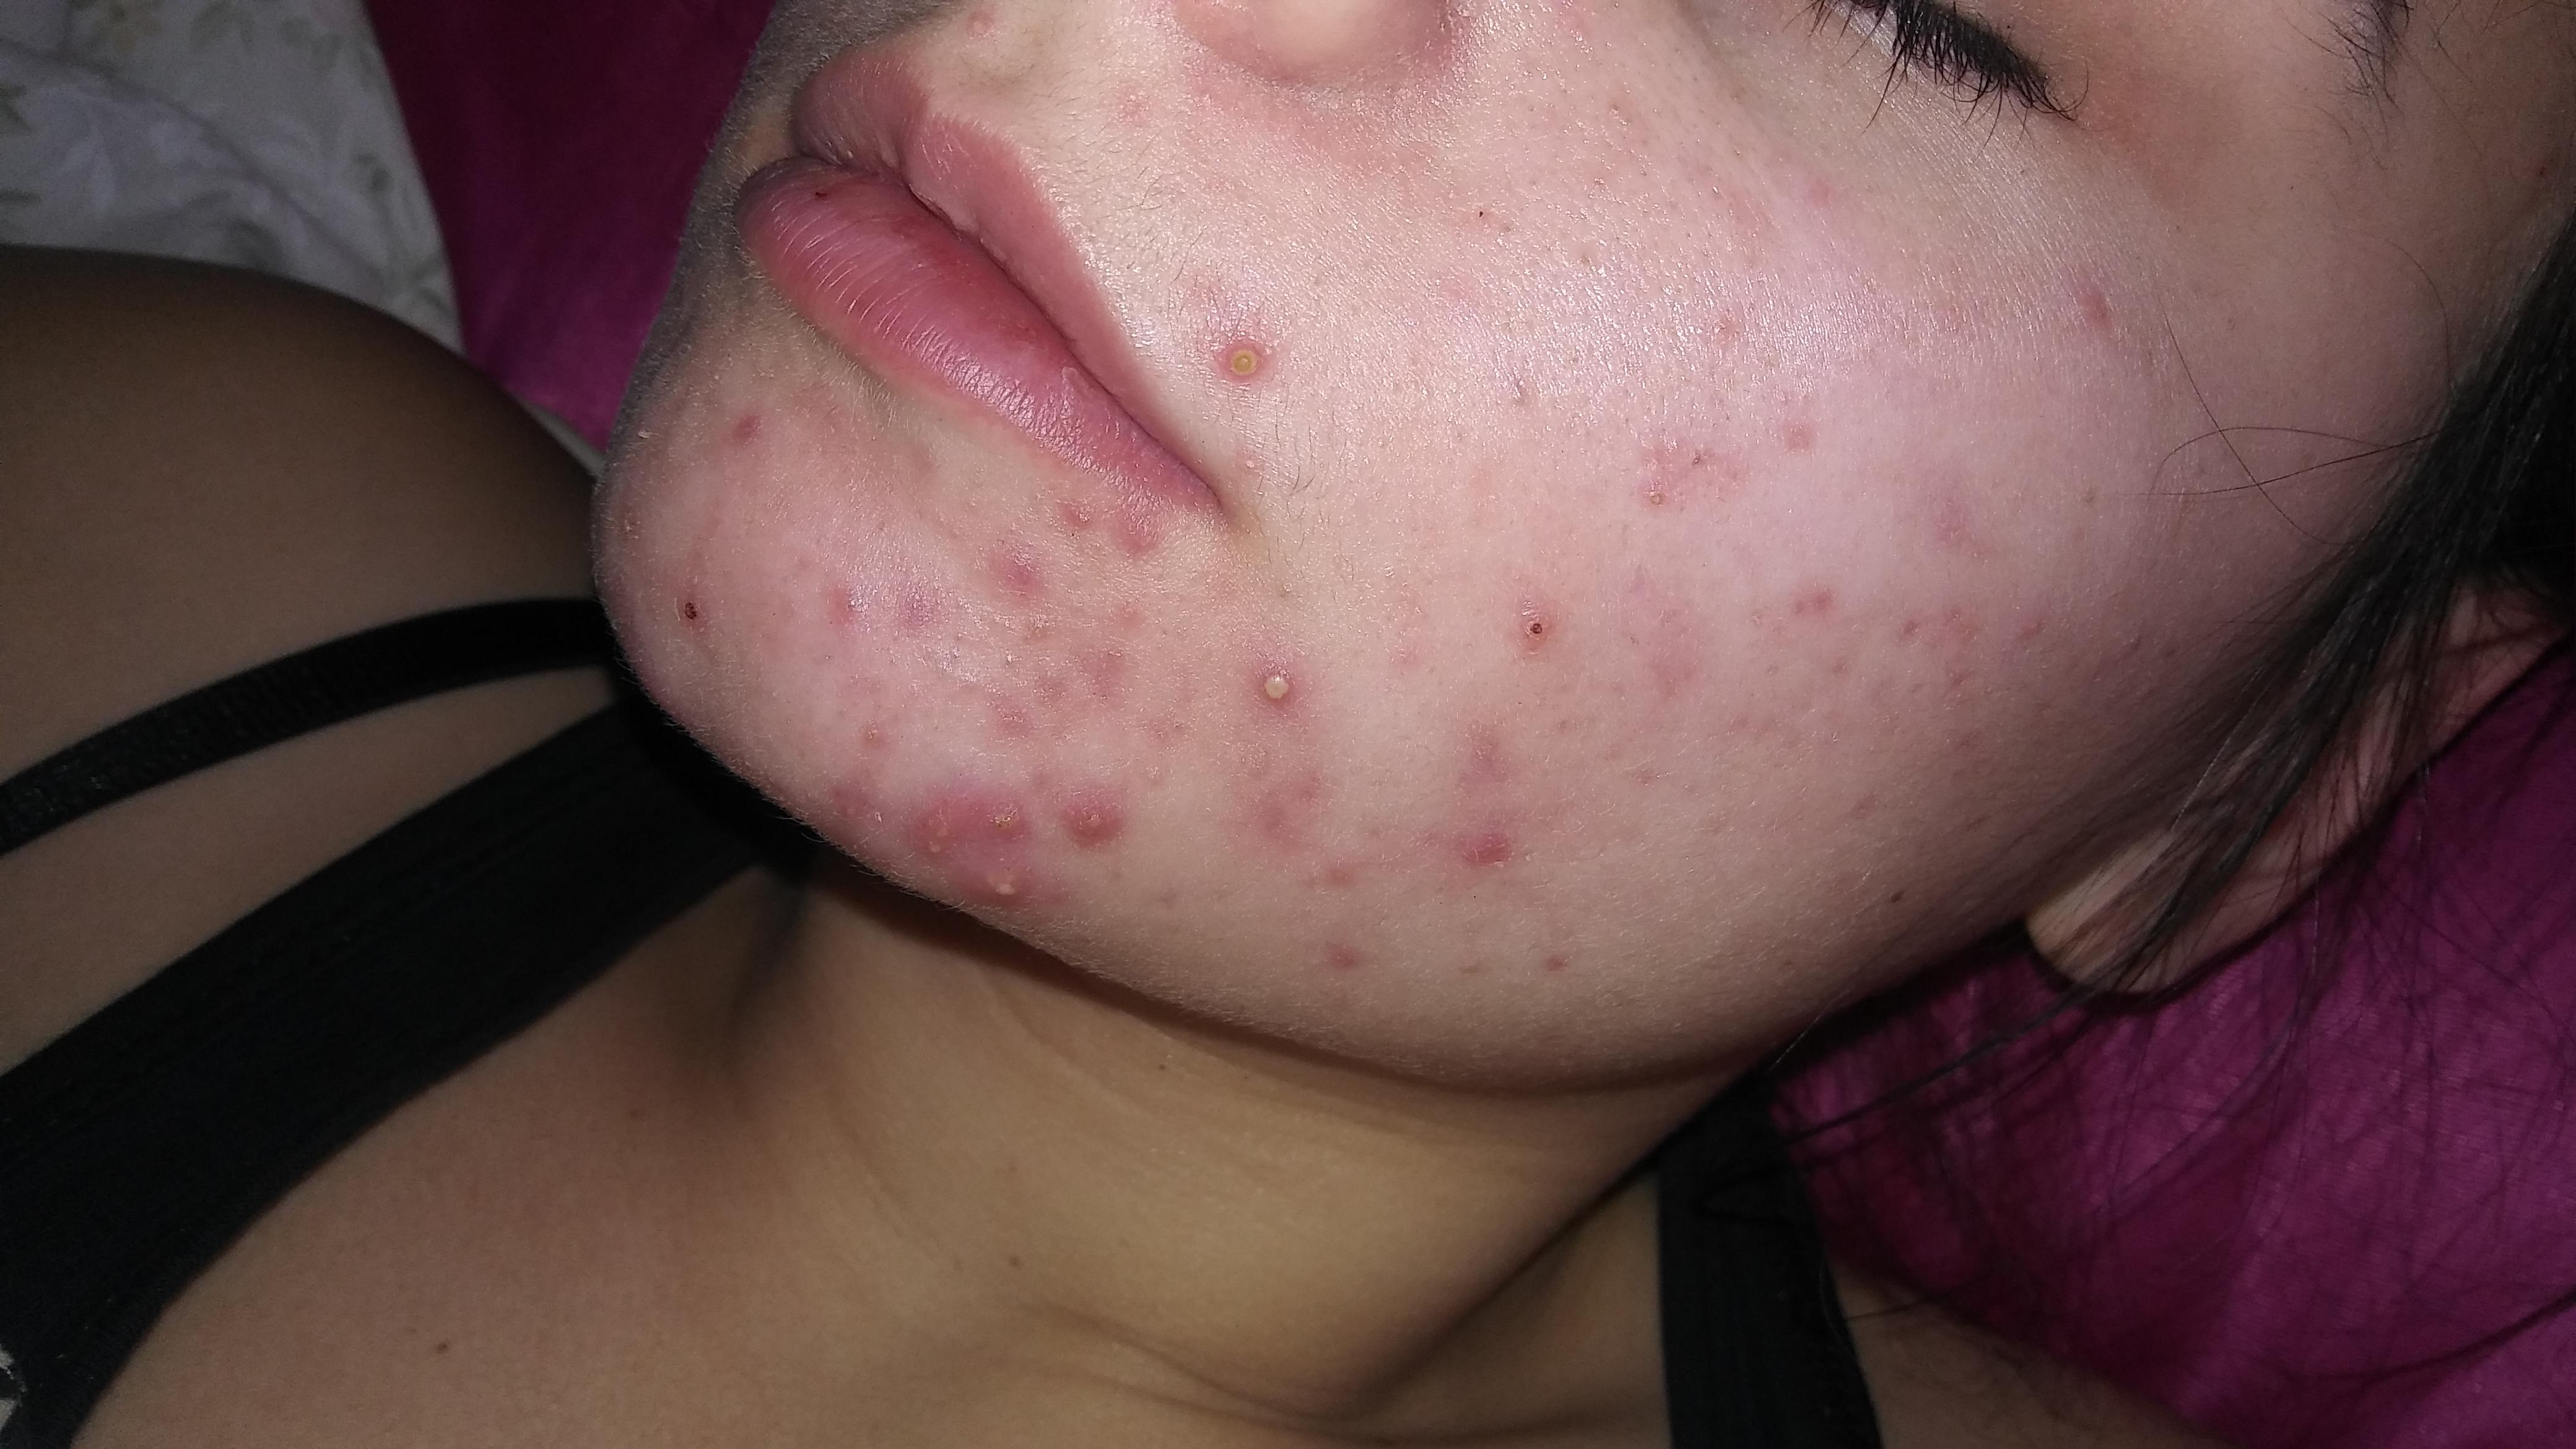 16 year old girl please help! - General acne discussion ...